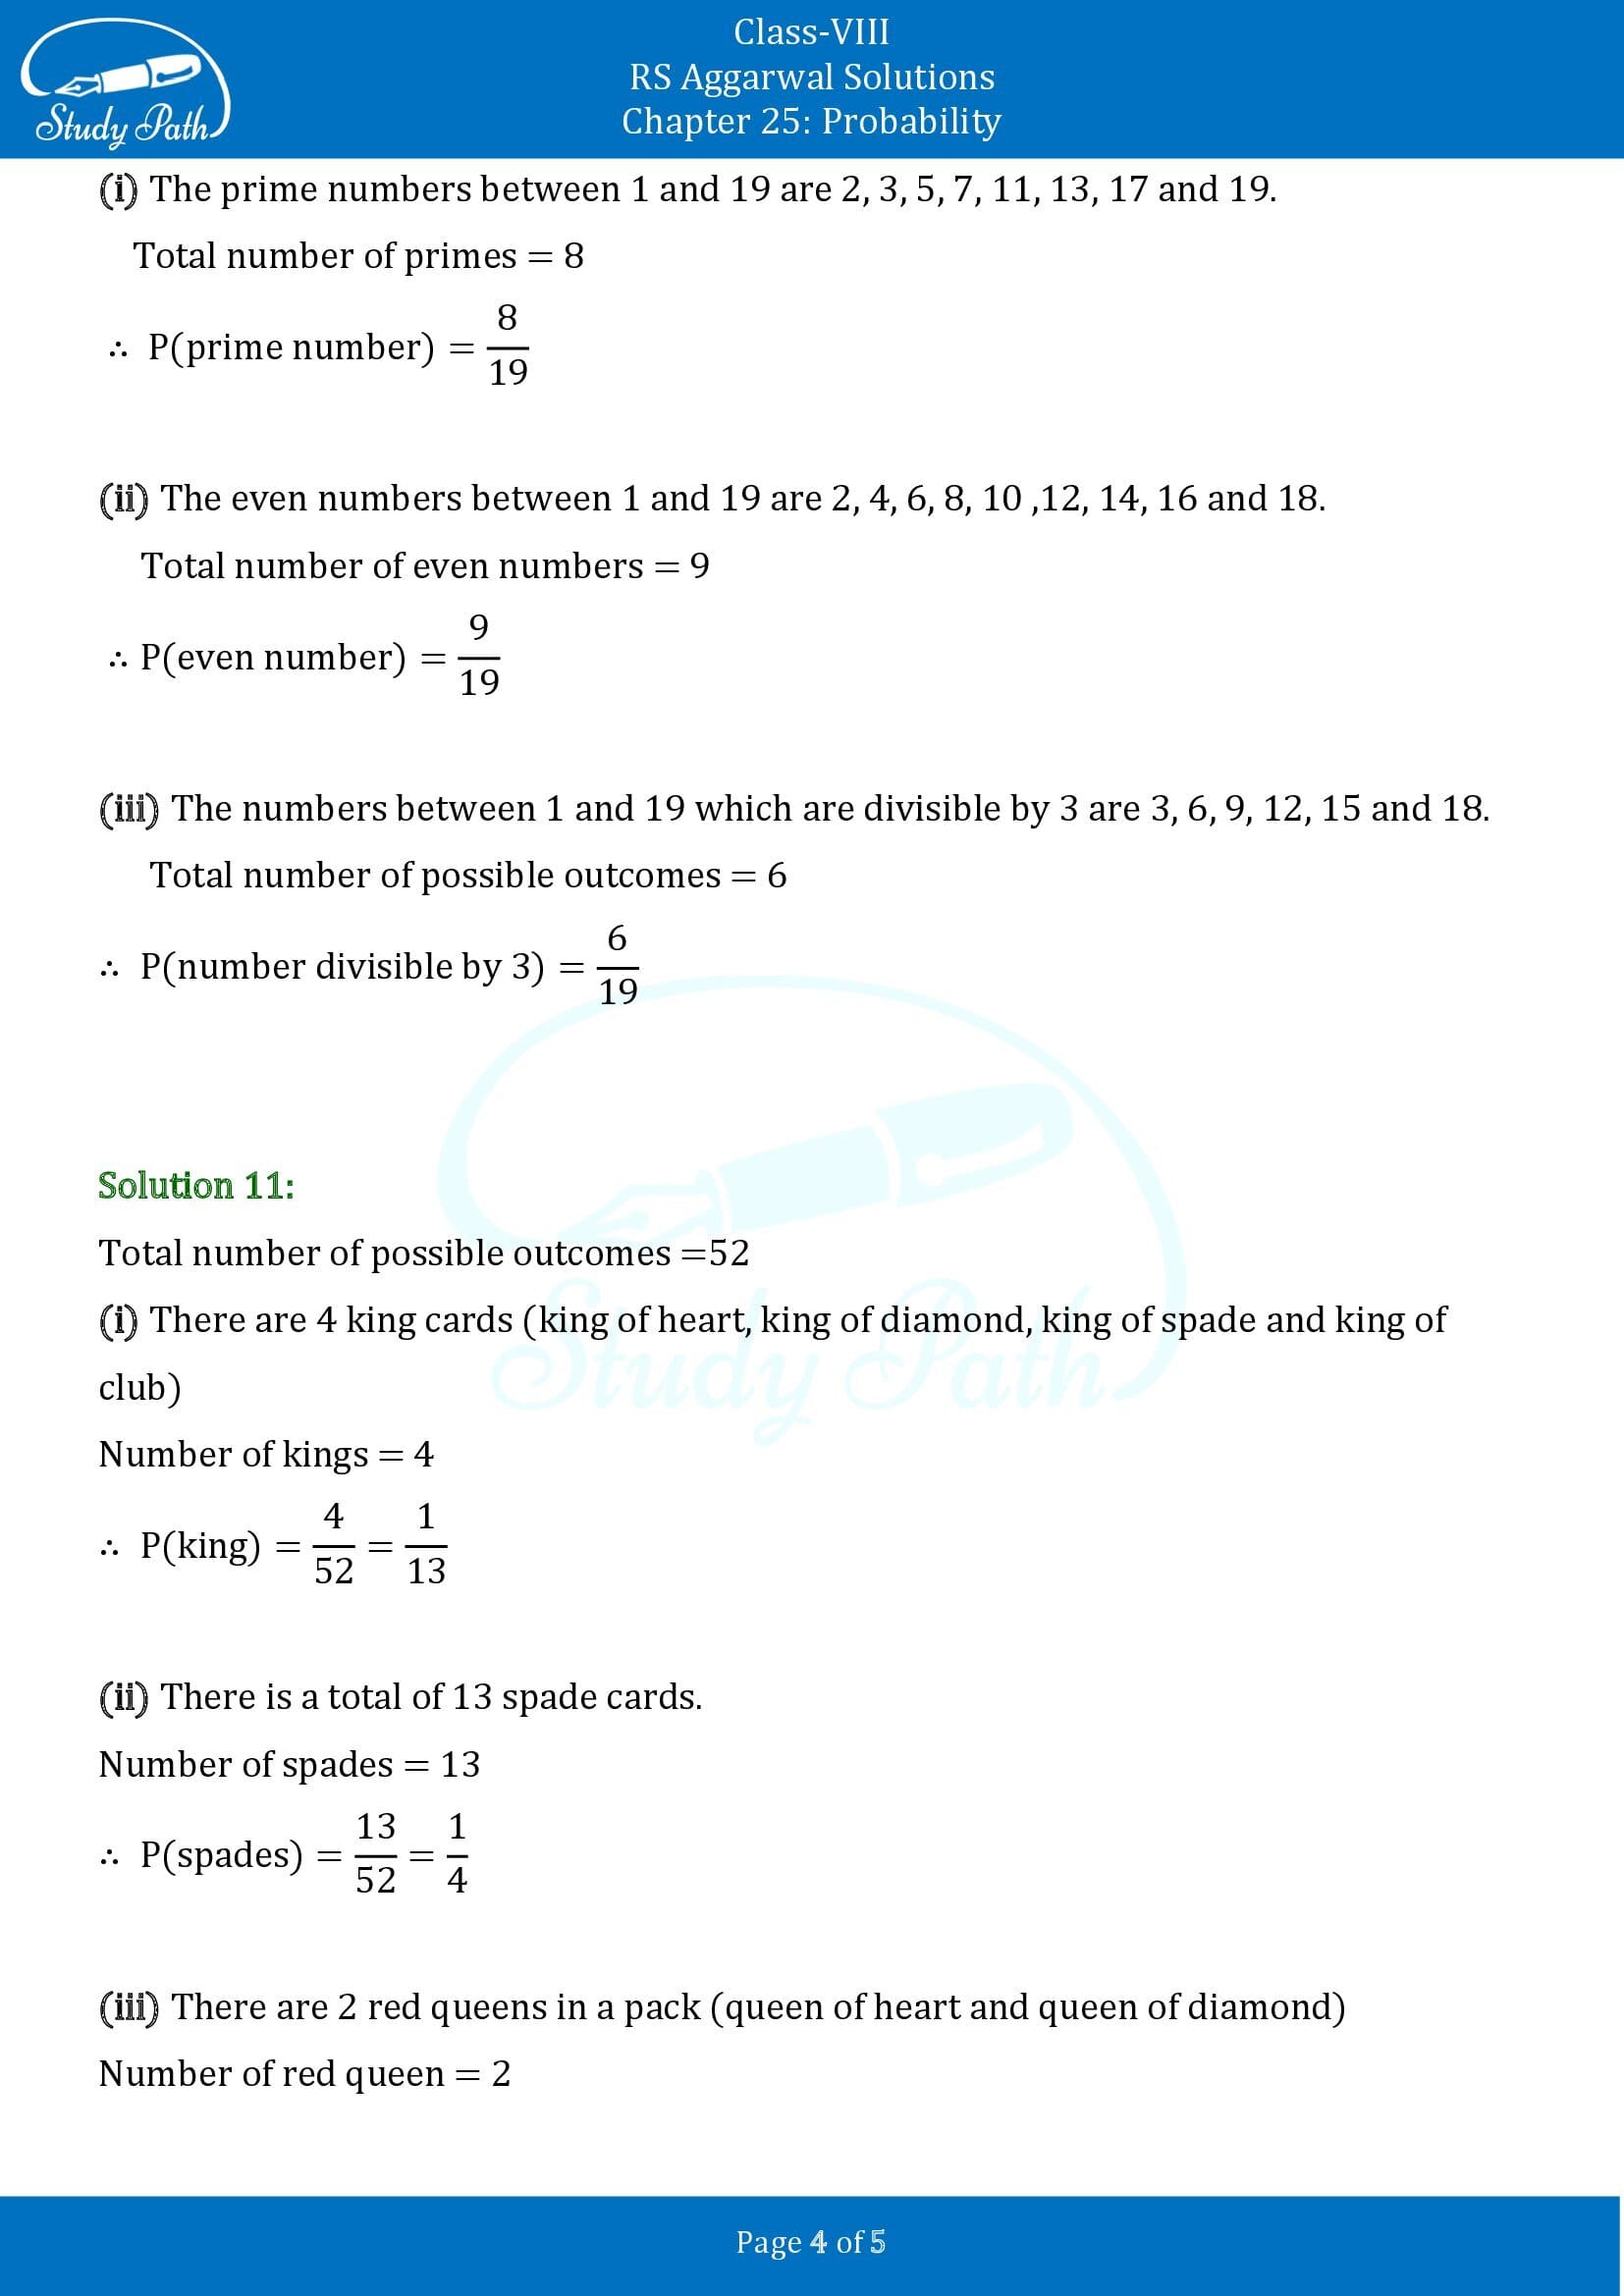 RS Aggarwal Solutions Class 8 Chapter 25 Probability Exercise 25A 00004